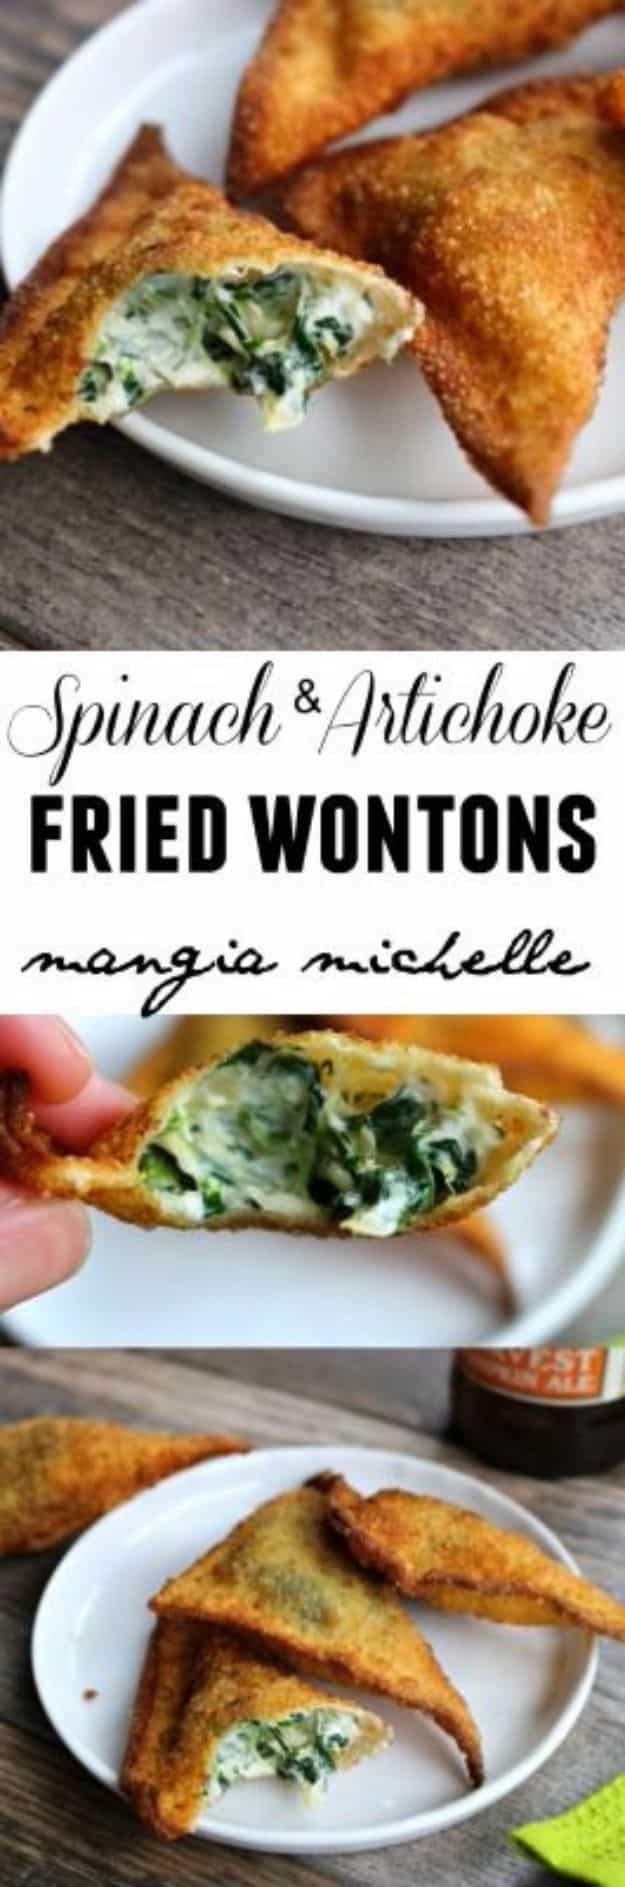 Best Spinach Recipes - Spinach And Artichoke Fried Wontons - Easy, Healthy Lowfat Recipe Ideas for Dinner, Salads, Lunches, Sides, Smoothies and Even Dessert - Qucik and Creative Ideas for Vegetables - Cheesy, Creamed, Country Style Favorites for Family and For Kids #recipes #vegetablerecipes #spinach